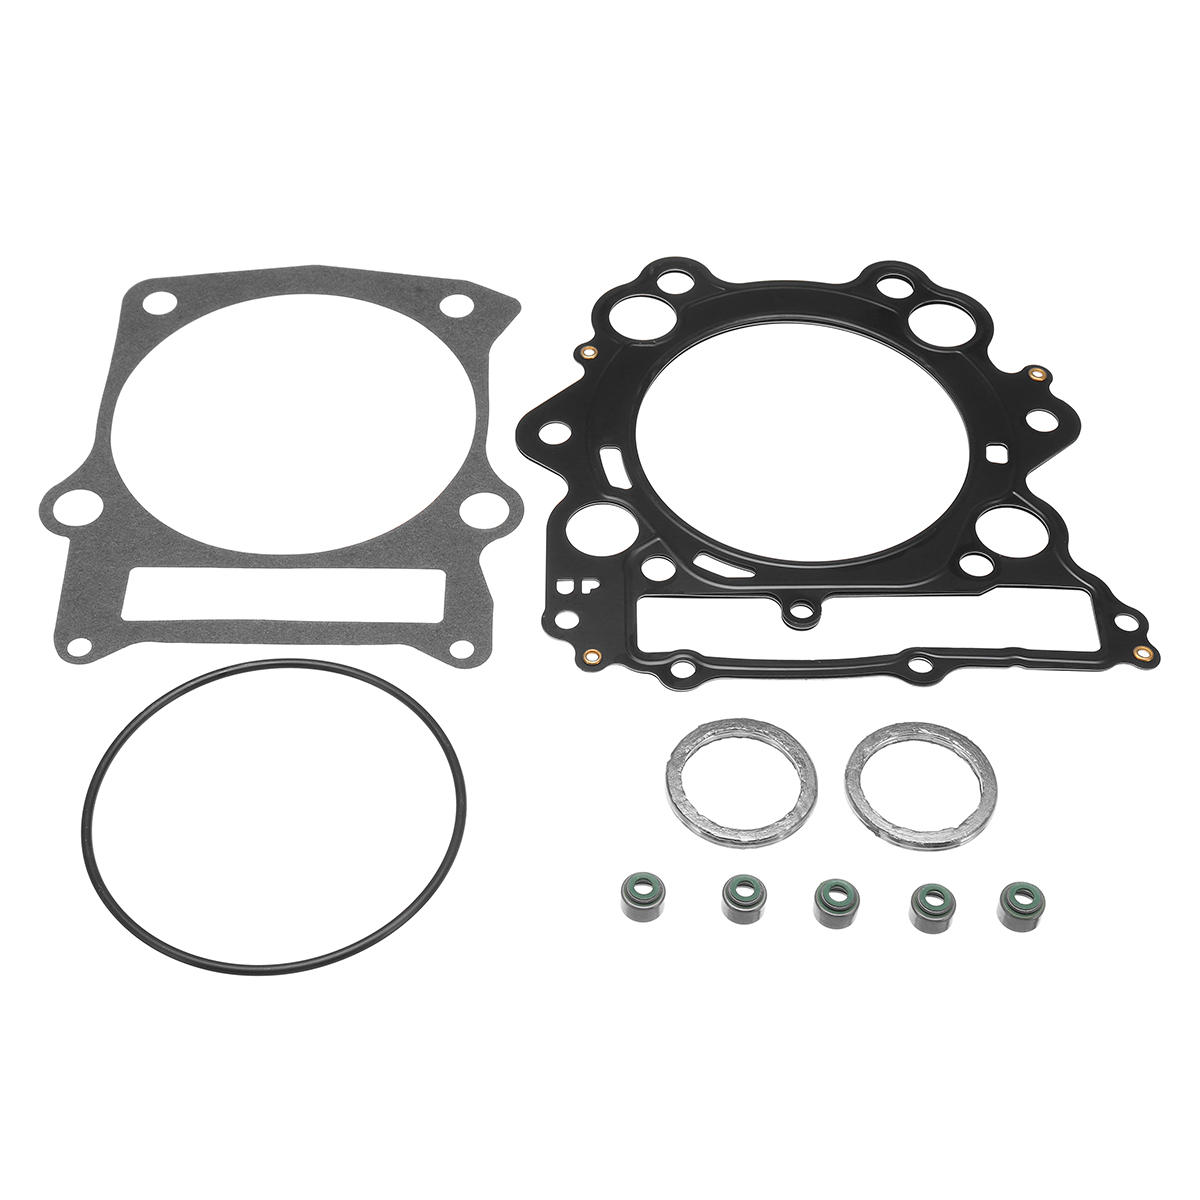 Top End Clutch Cylinder Full Engine Gasket Kit For YAMAHA GRIZZLY 600 1998-2001